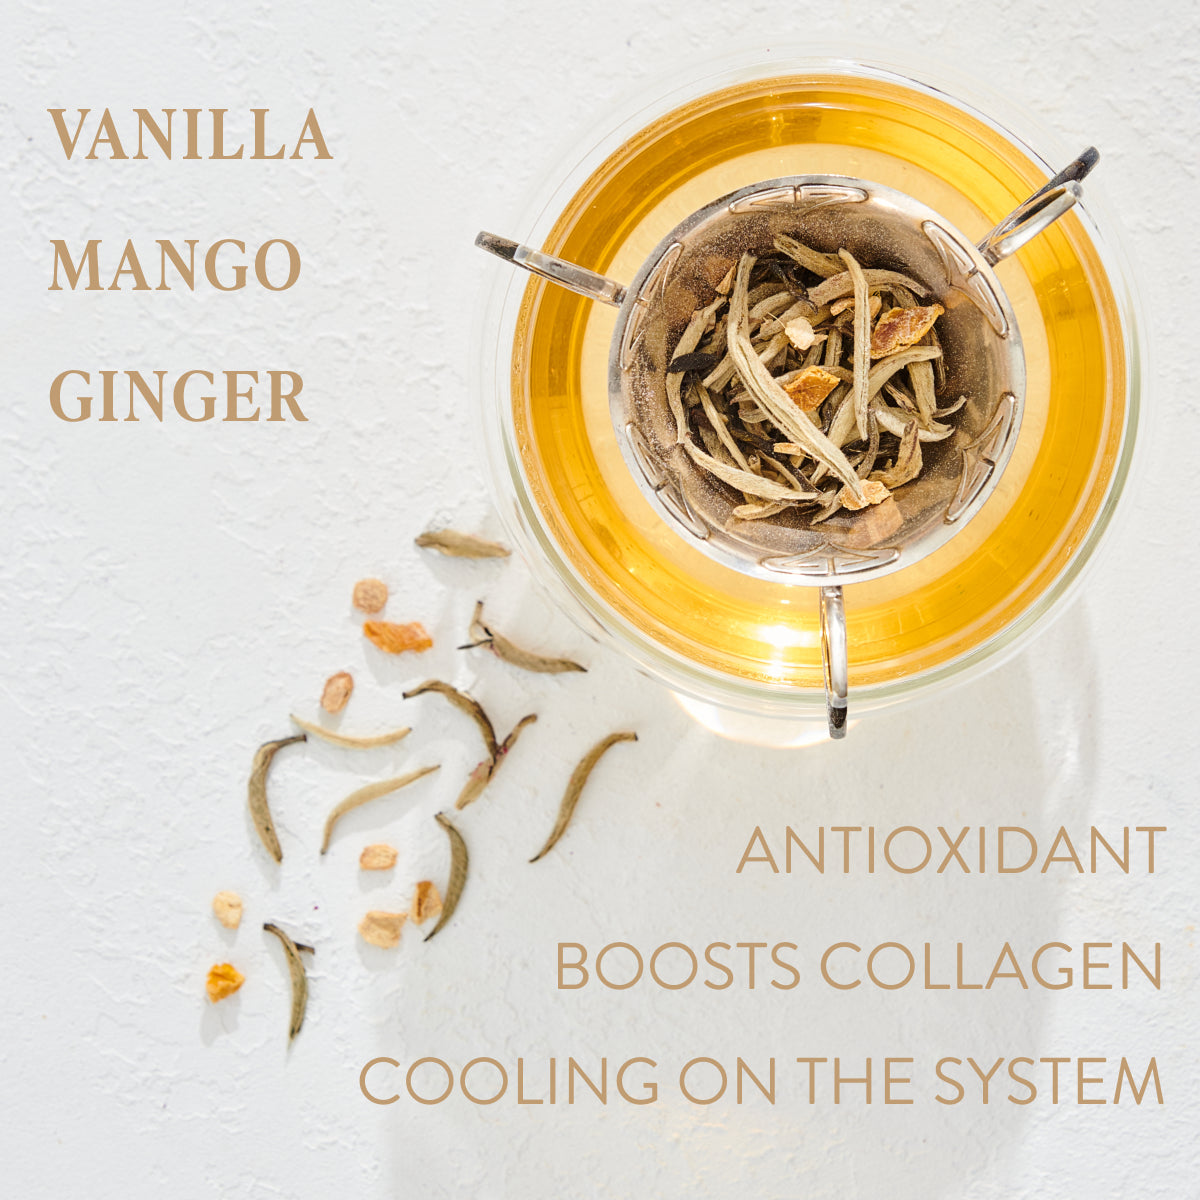 A glass cup filled with golden tea and loose leaf tea around it is shown from above. The text on the left reads "Vanilla, Mango, Ginger," and on the right it reads "Organic Tea, Boosts Collagen, Cooling on the System." Indulge in Magic Hour Cancer: Queen of Cool Mango-Ginger-Cream White Tea for a truly enriching experience.